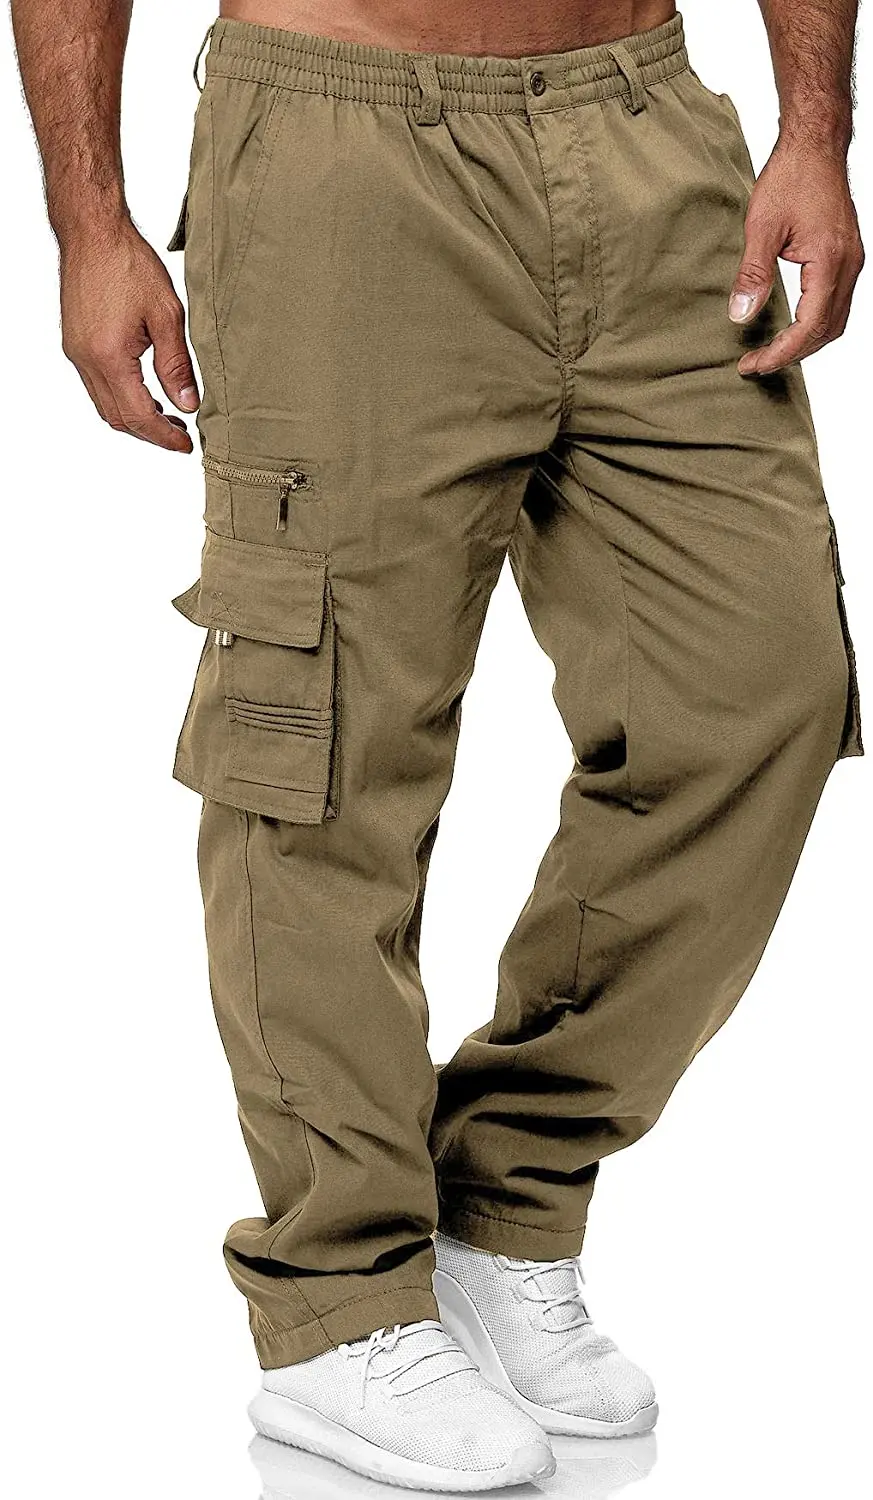 Organic Cotton Trousers Mens Cargo Pants 6 Pocket Cargo Trousers